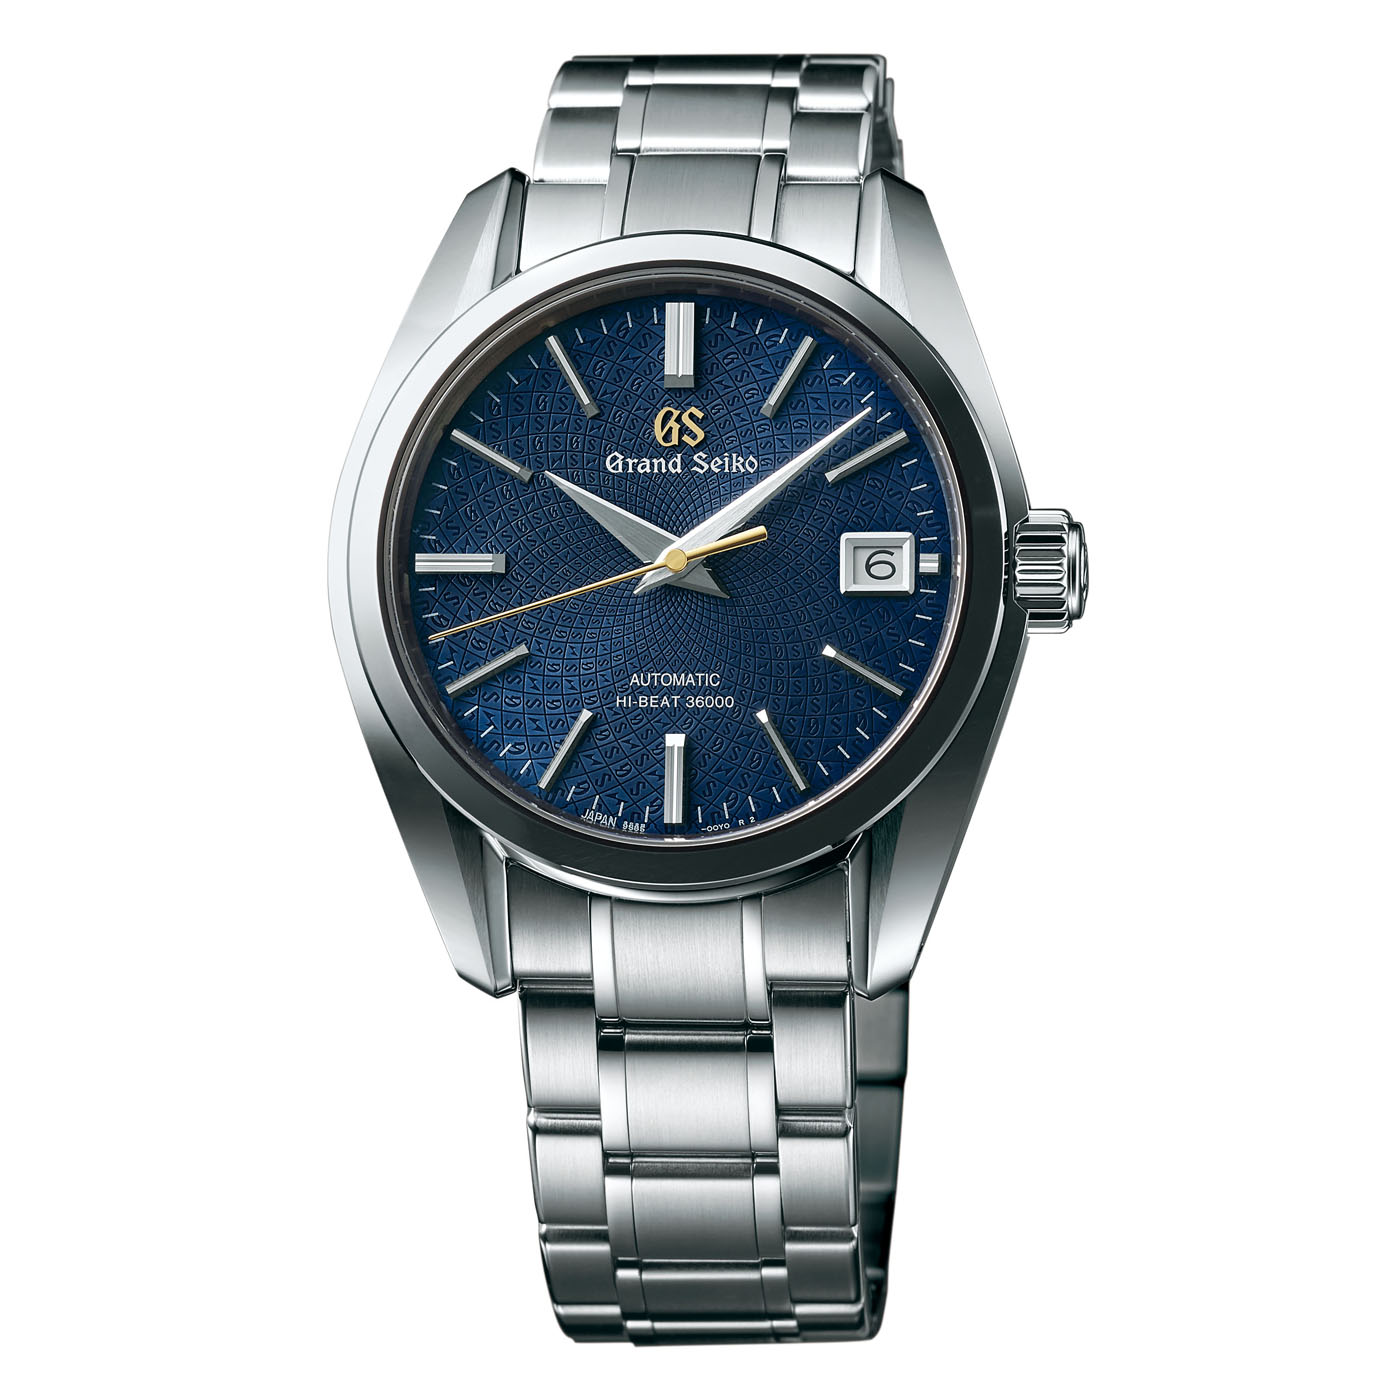 Baselworld 2018: Grand Seiko Celebrates the 20th Anniversary of Calibre 9S  with Three New High-Beat Limited Edition Watches